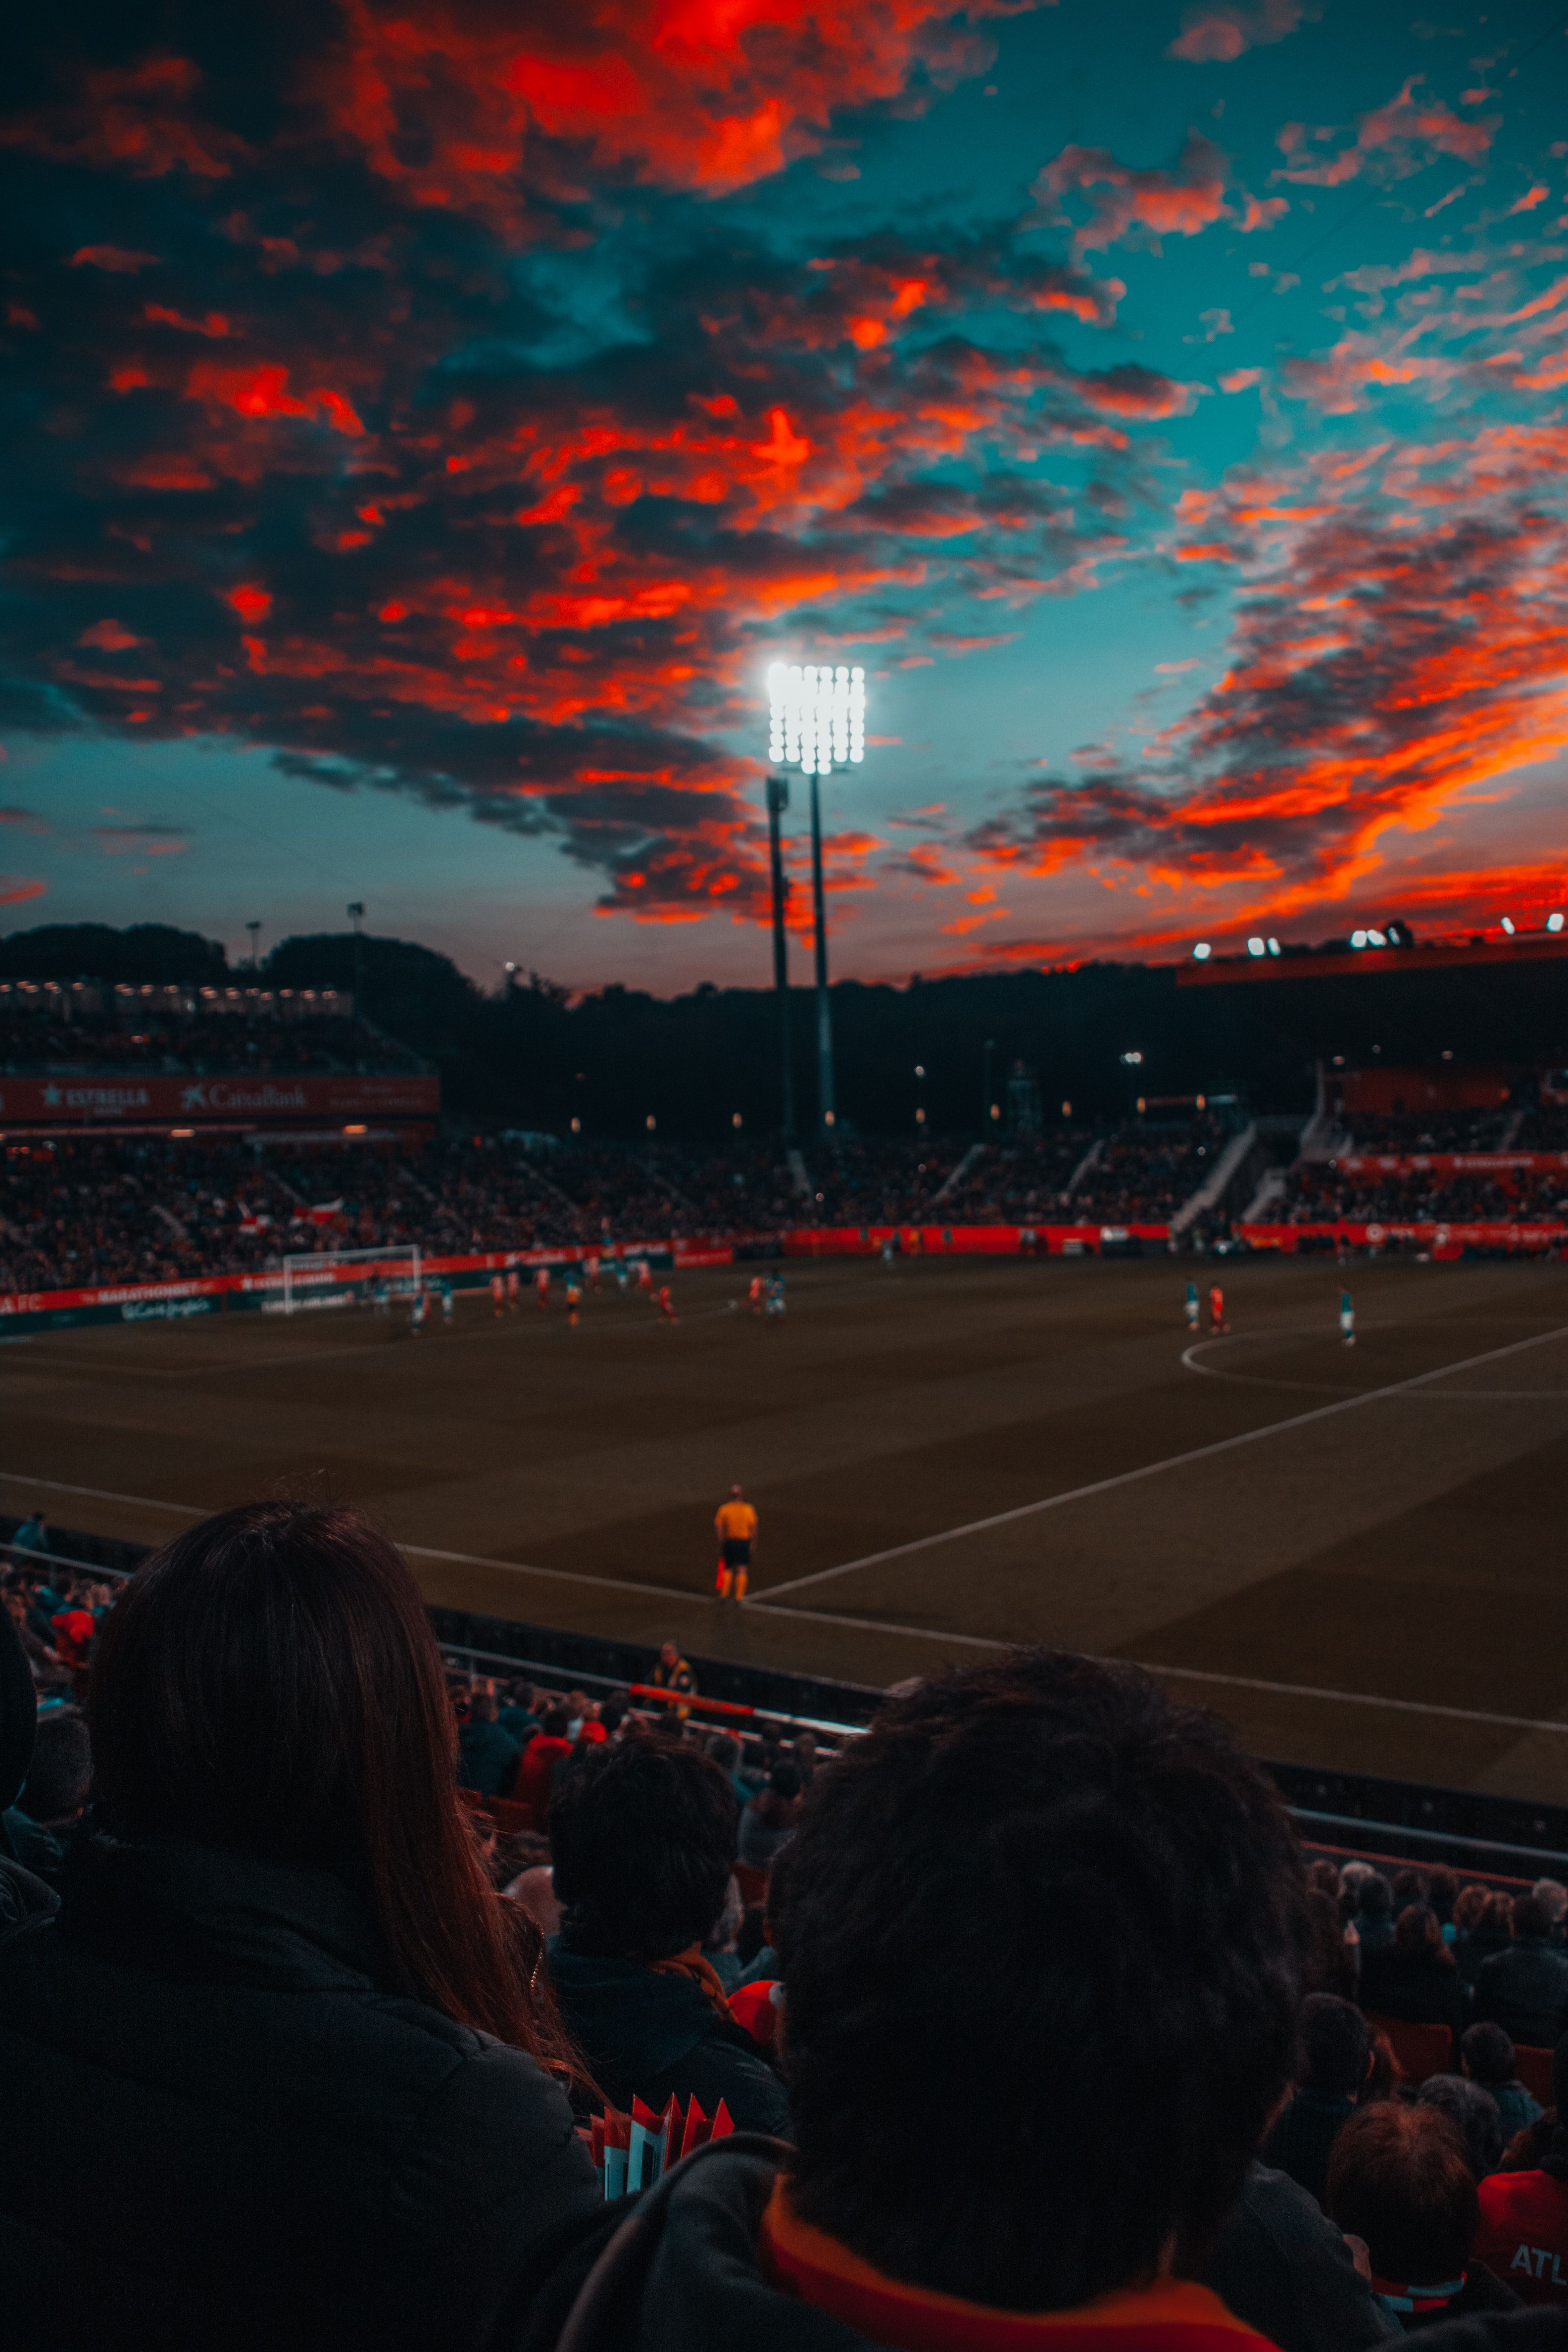 A soccer game is being played at night with the stadium lights illuminating the field. - Soccer